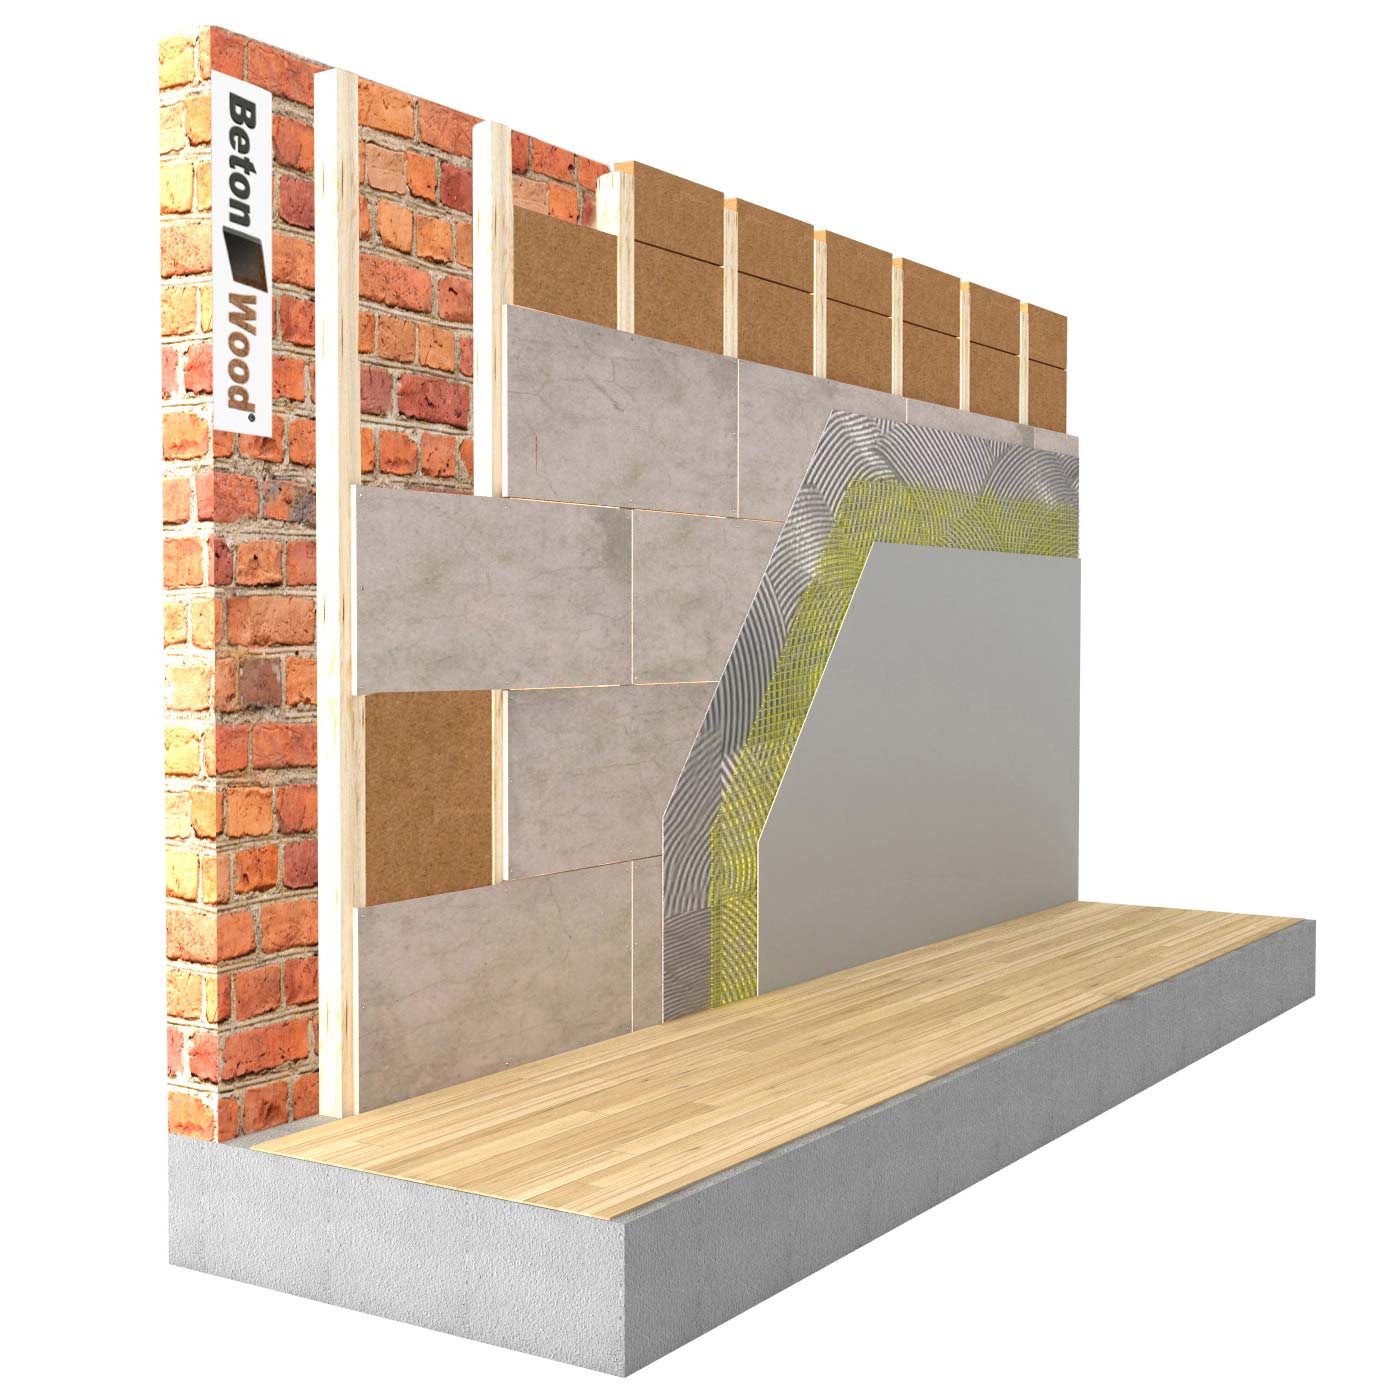 Internal insulation system with Therm SD wood fibre board on masonry